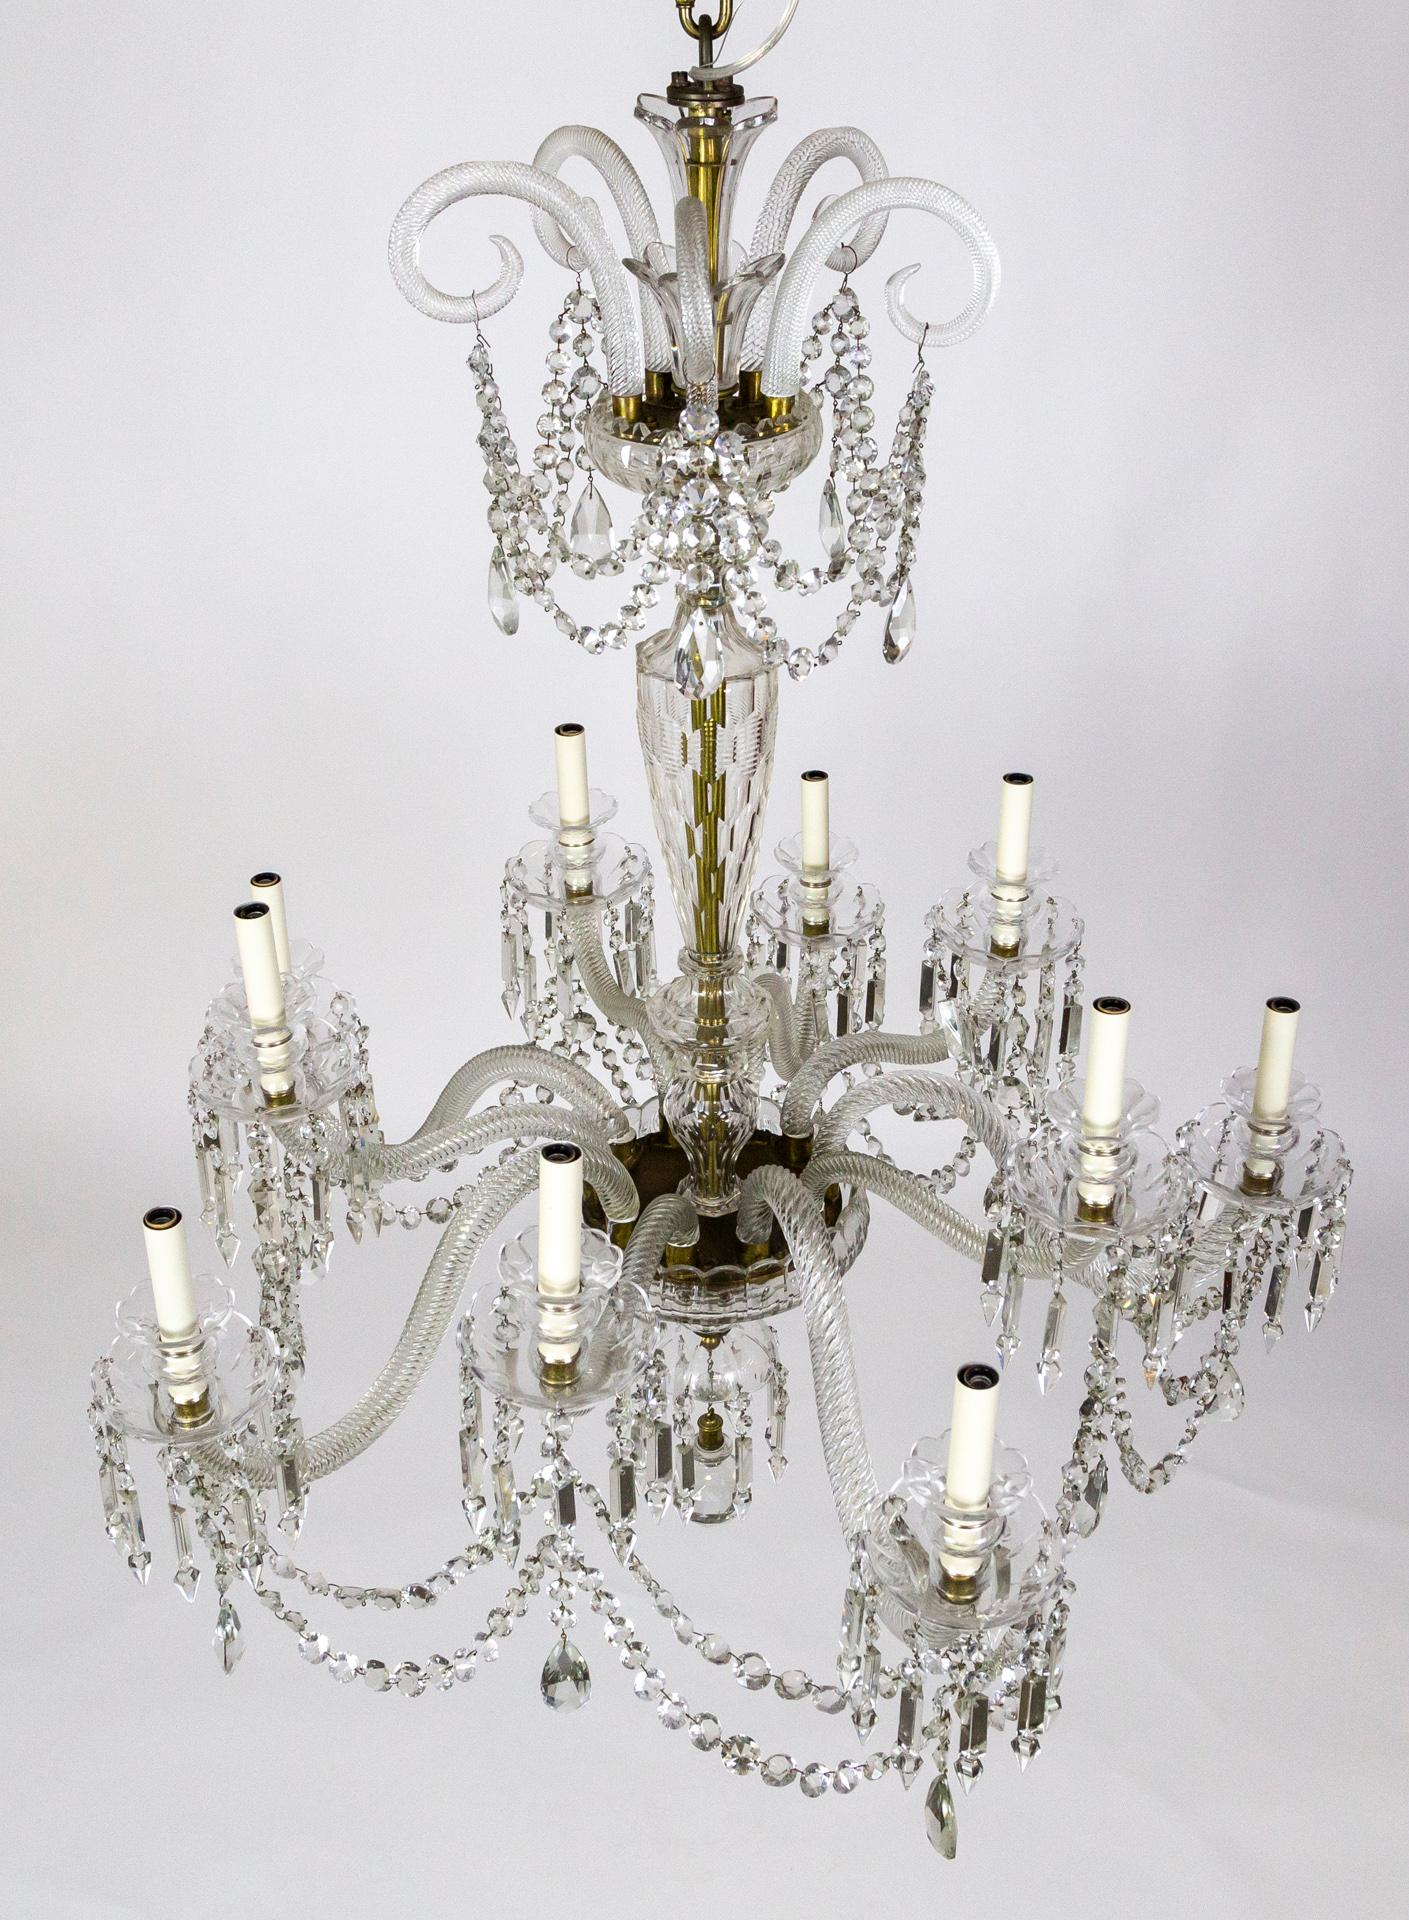 Grand Cut Crystal George III Chandelier w/ Faceted Column  For Sale 9